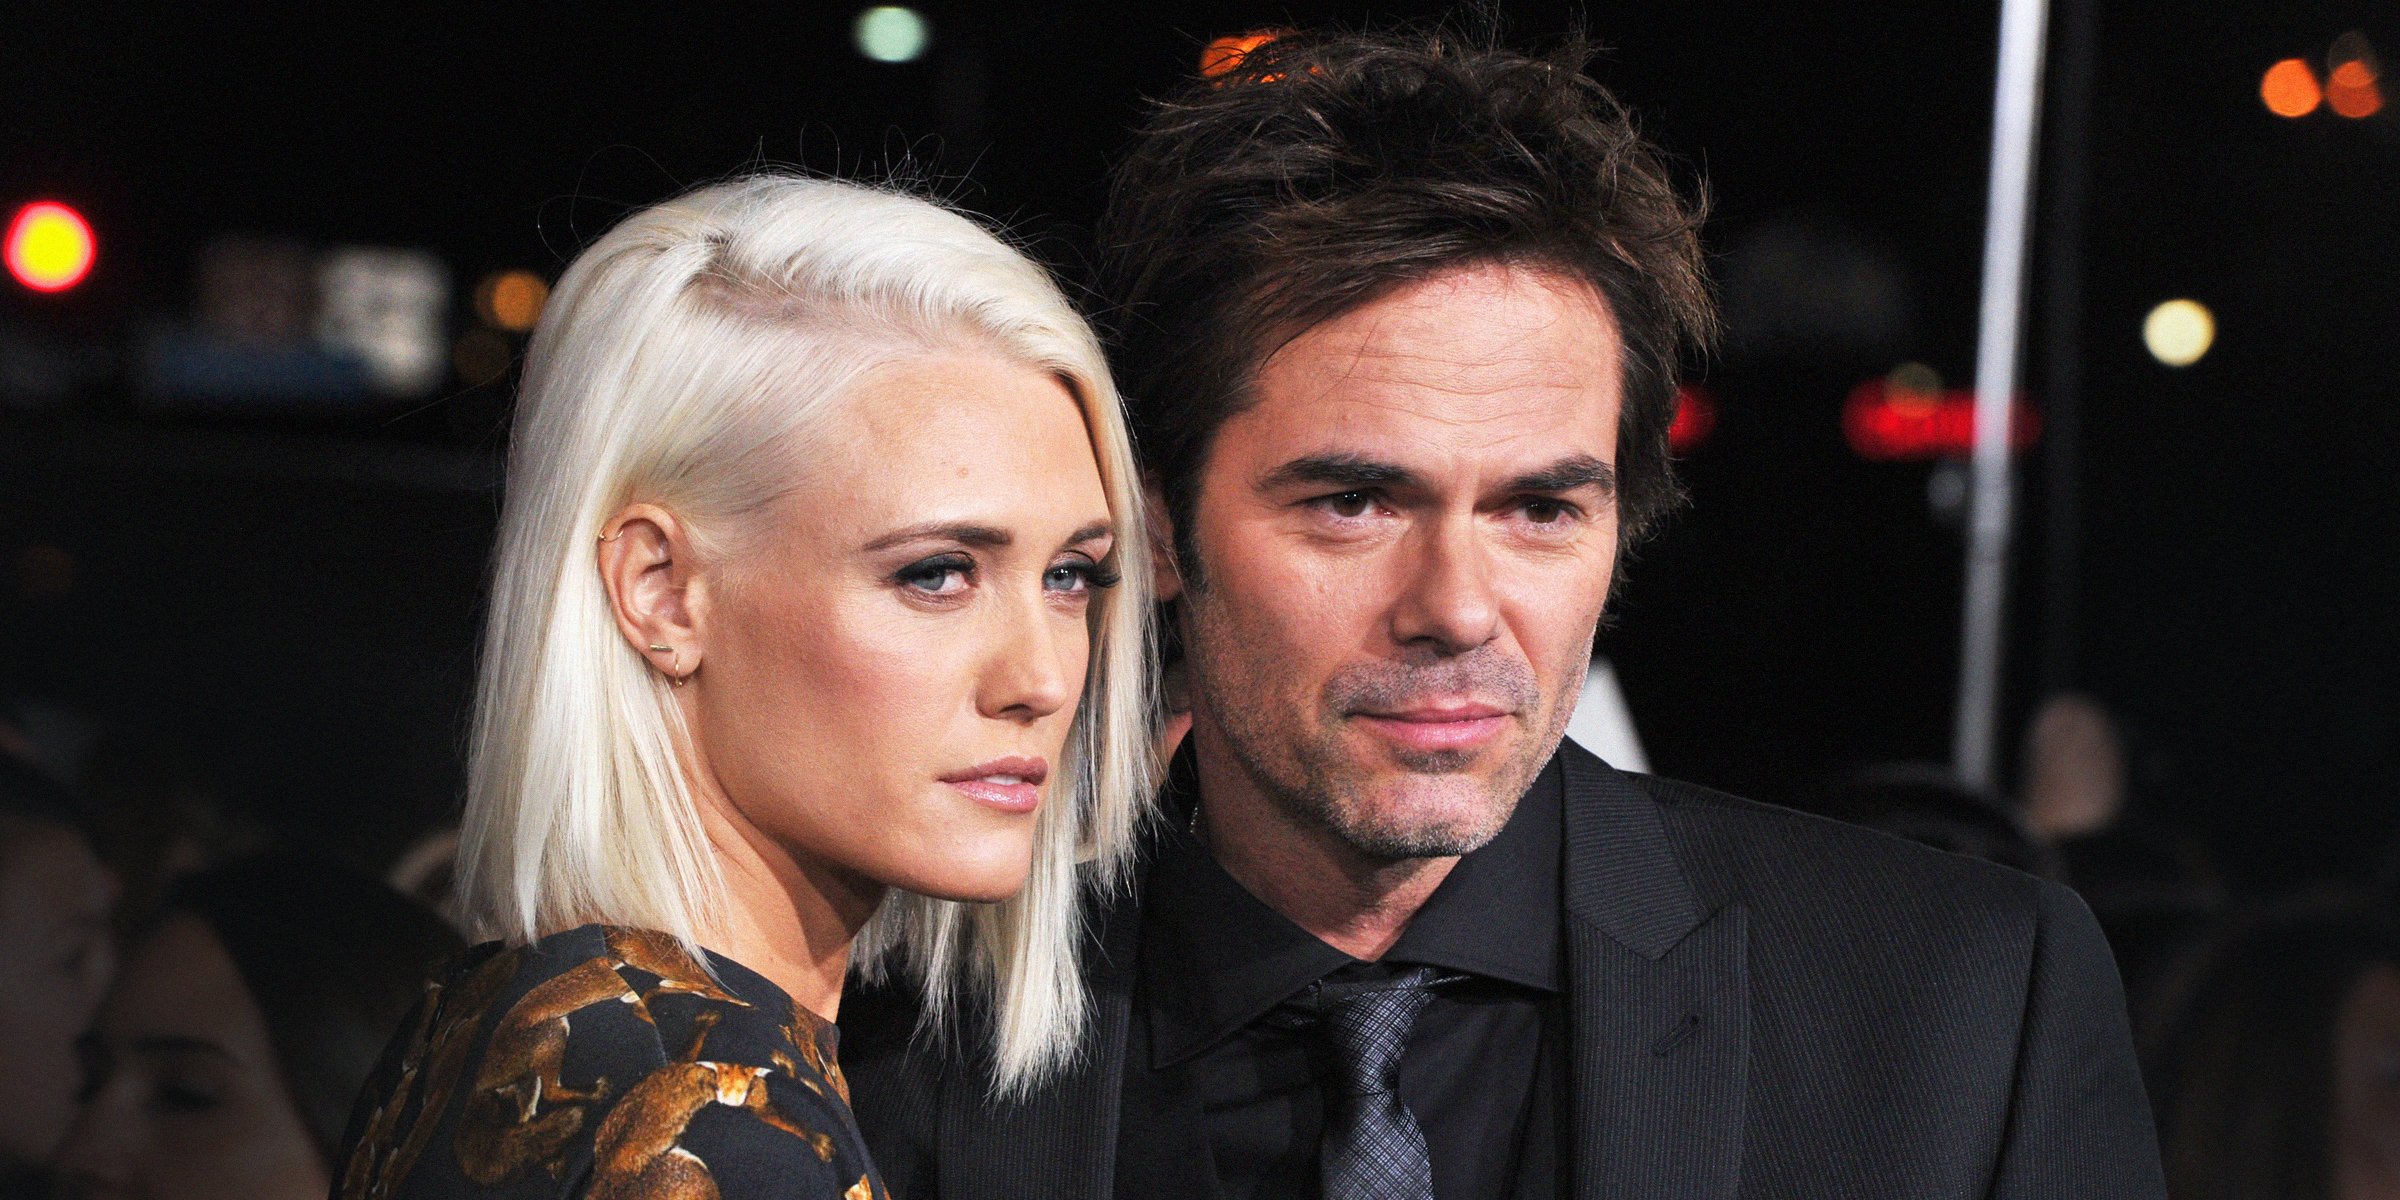 Pollyanna Rose and Billy Burke. | Source: Getty Images